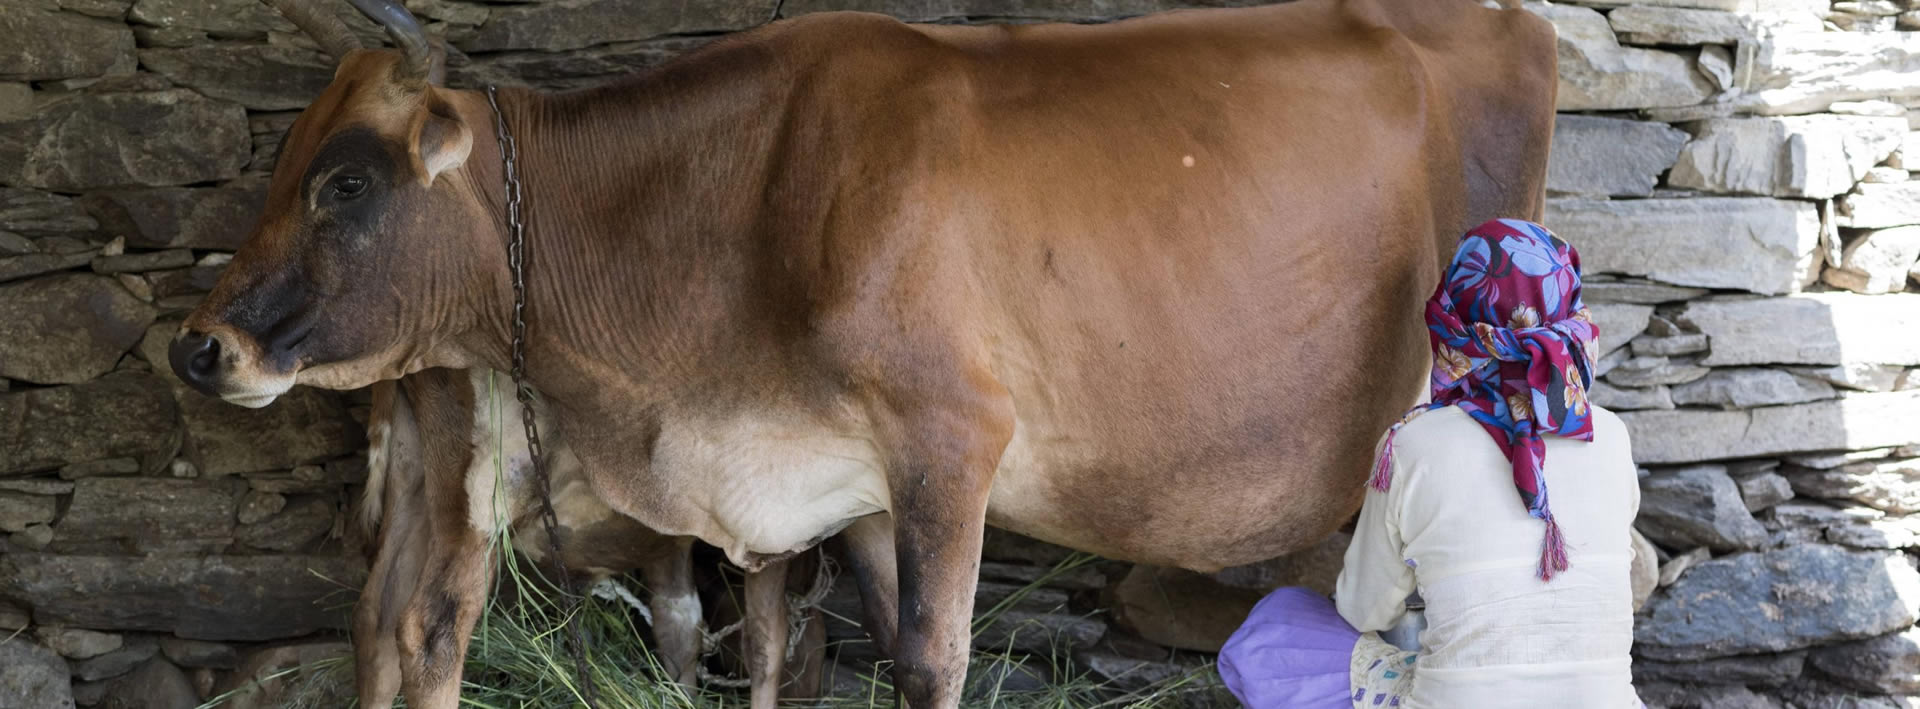 Coronavirus pandemic: Death knell for livestock and livelihoods - IFPRI  South Asia Office